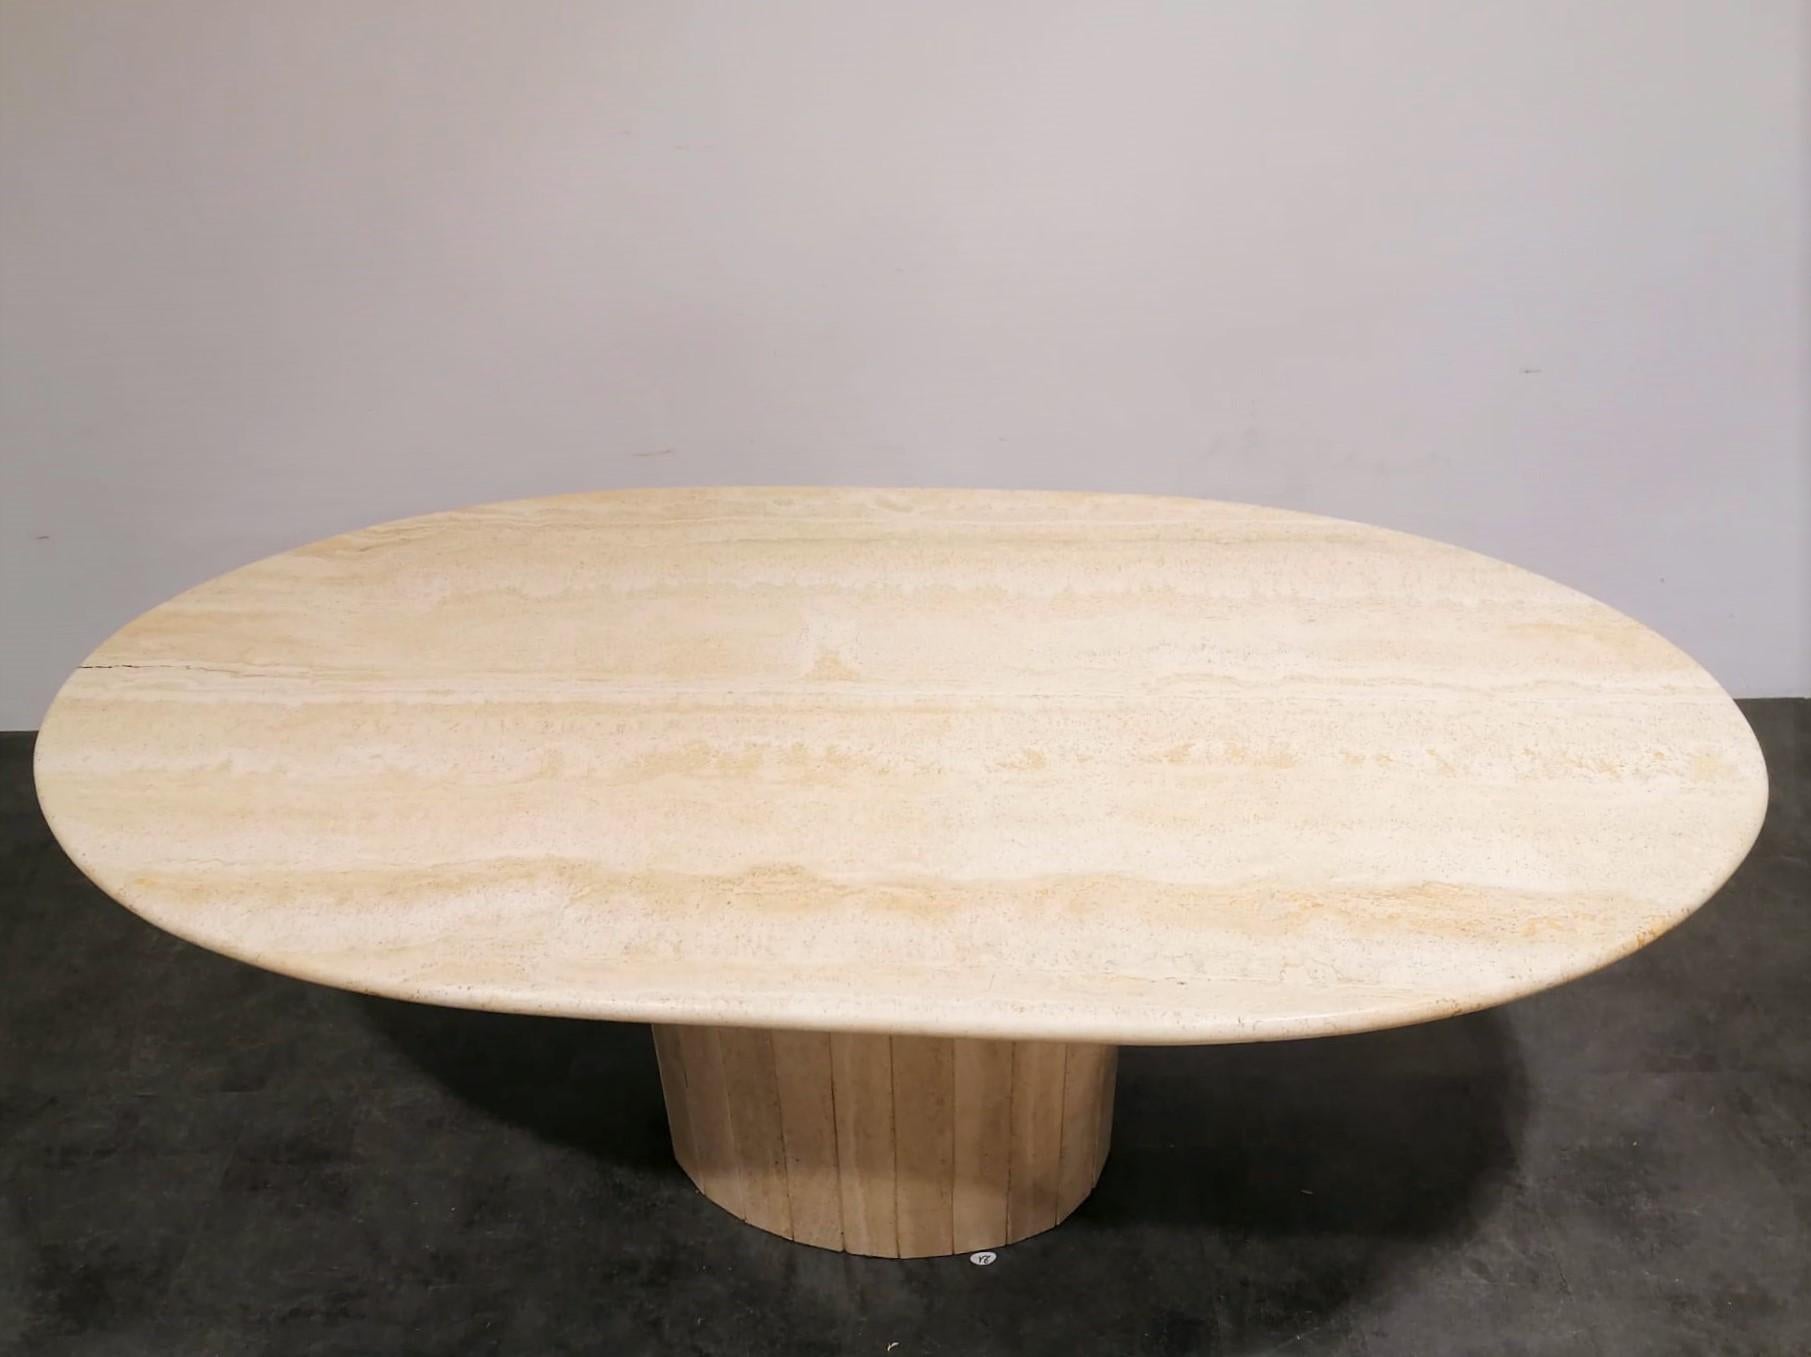 Elegant travertine dining table with a reeded central base. 

Beautiful coloured travertine with a natural pattern.

Timeless and very beautiful table wich fits most interiors.

Good condition. 

1970s - Italy

Dimensions:
Height: